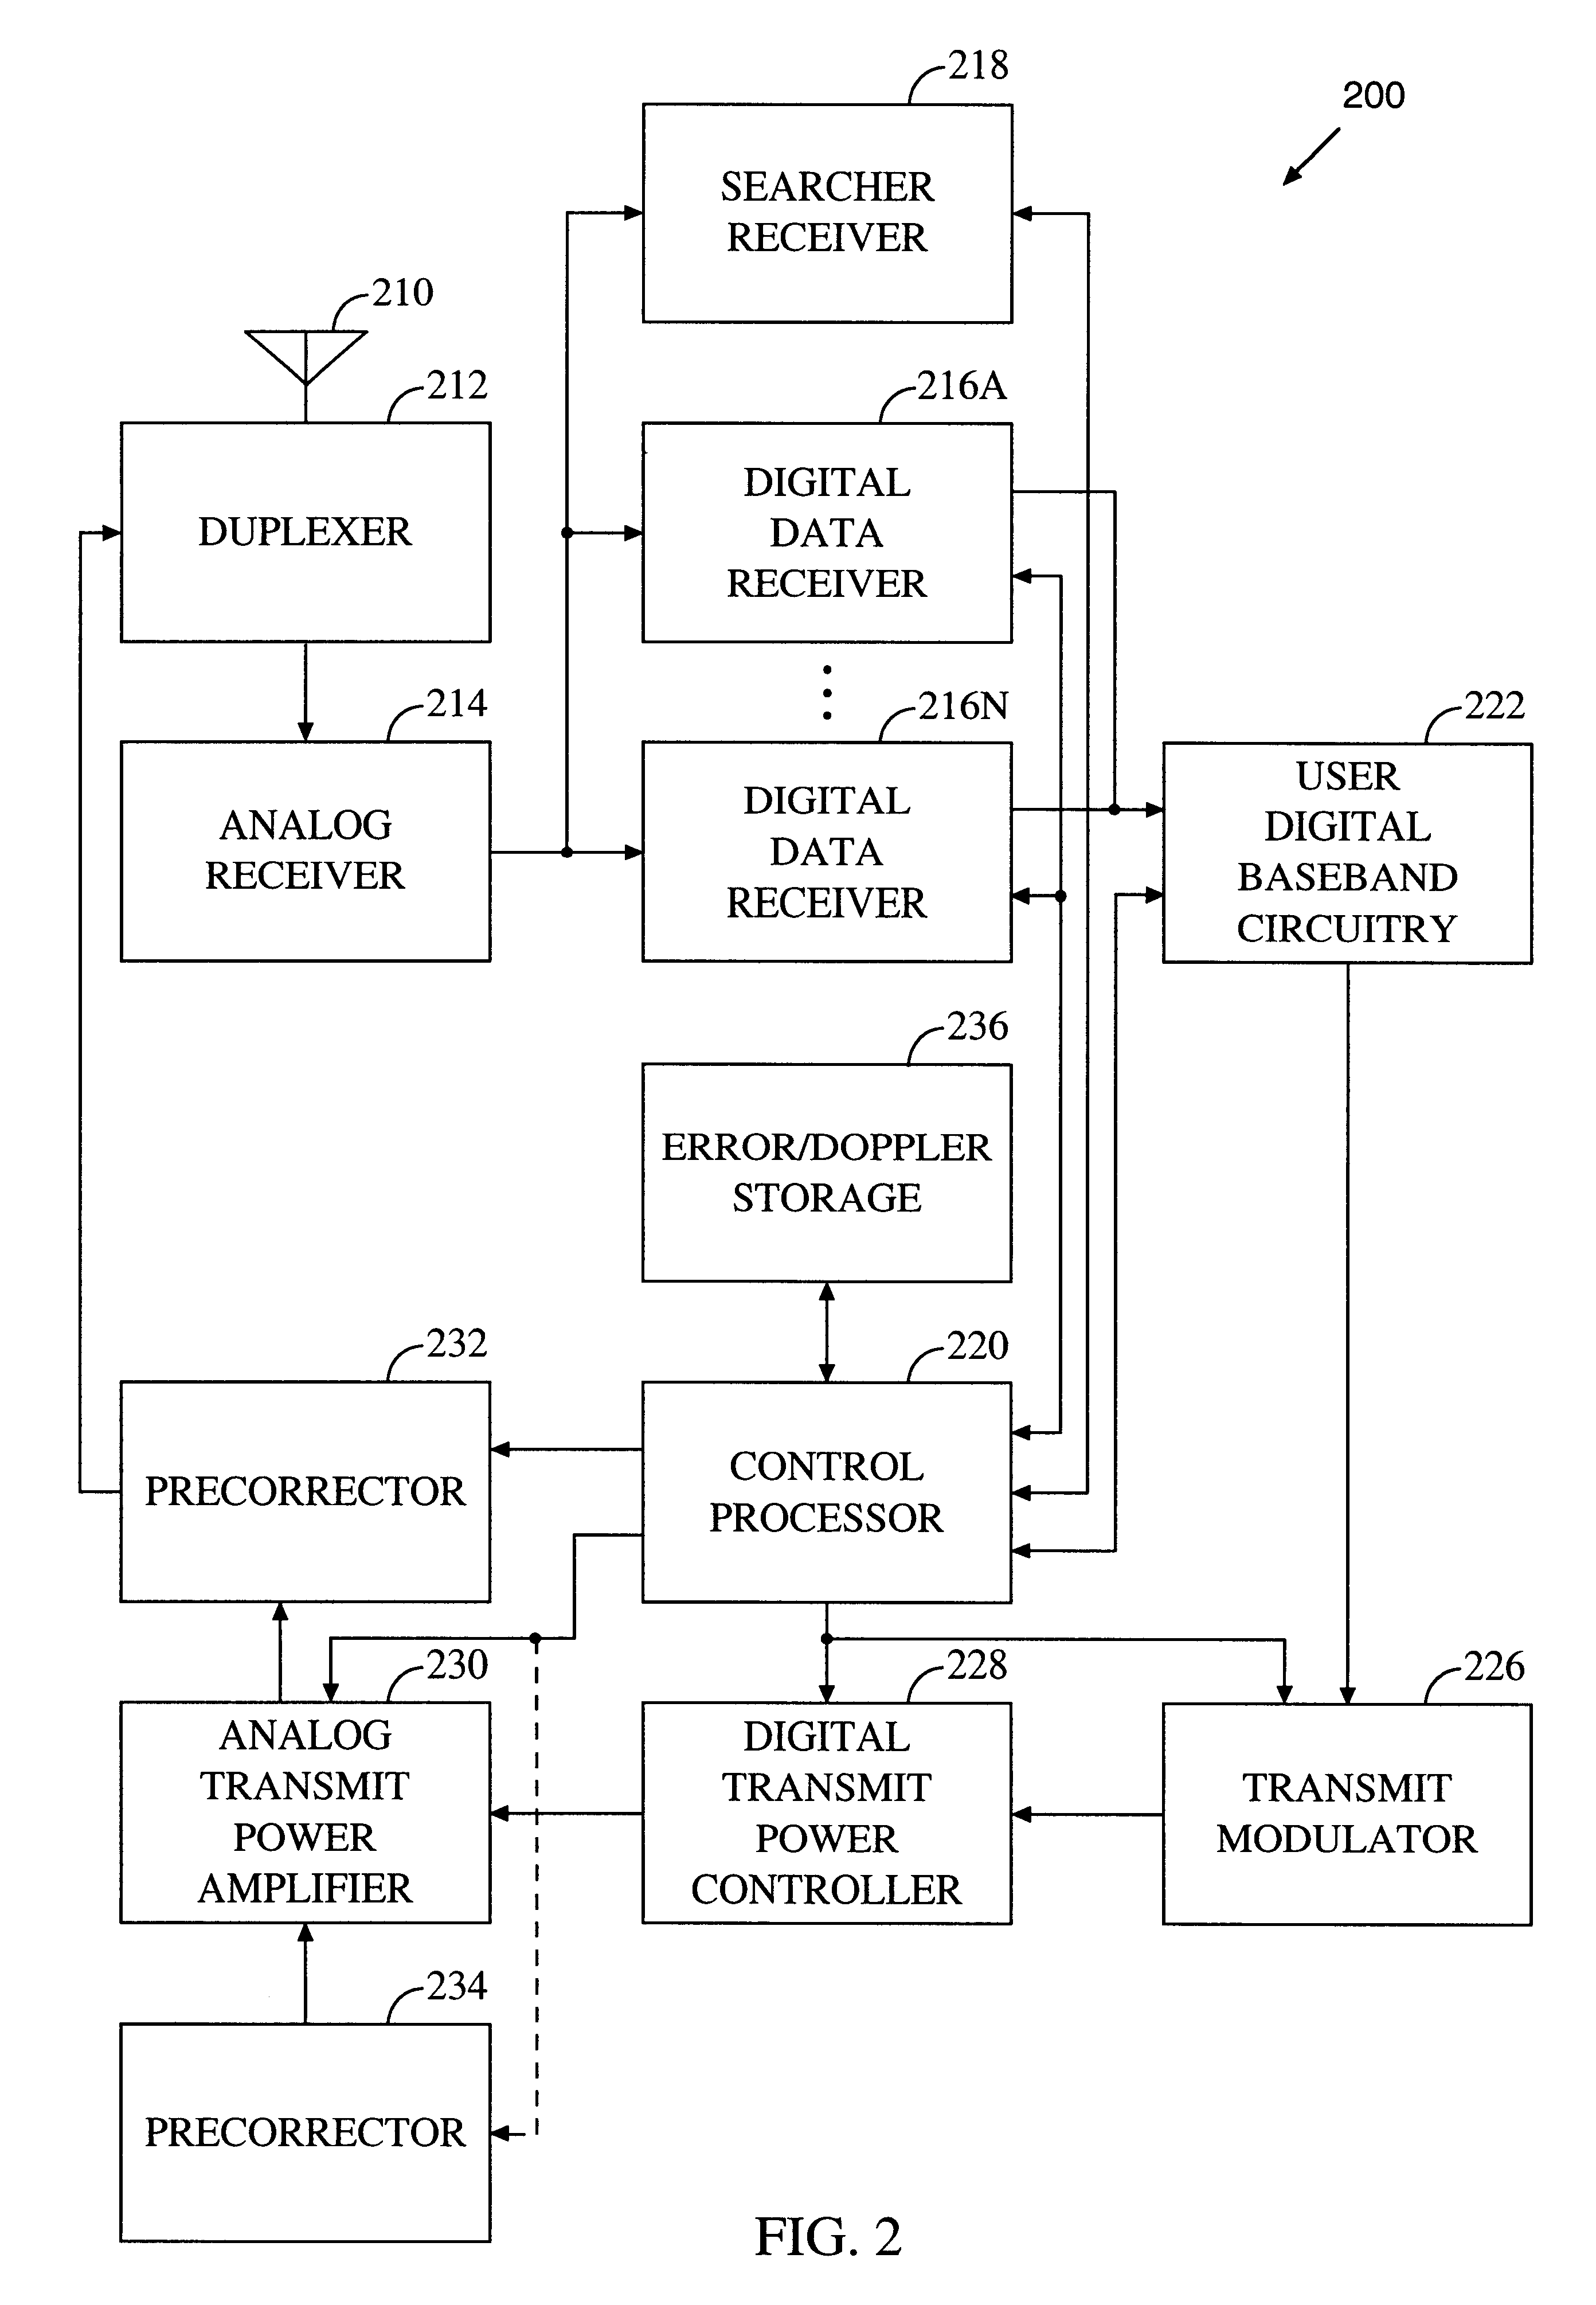 System and method for narrowing the range of frequency uncertainty of a doppler shifted signal